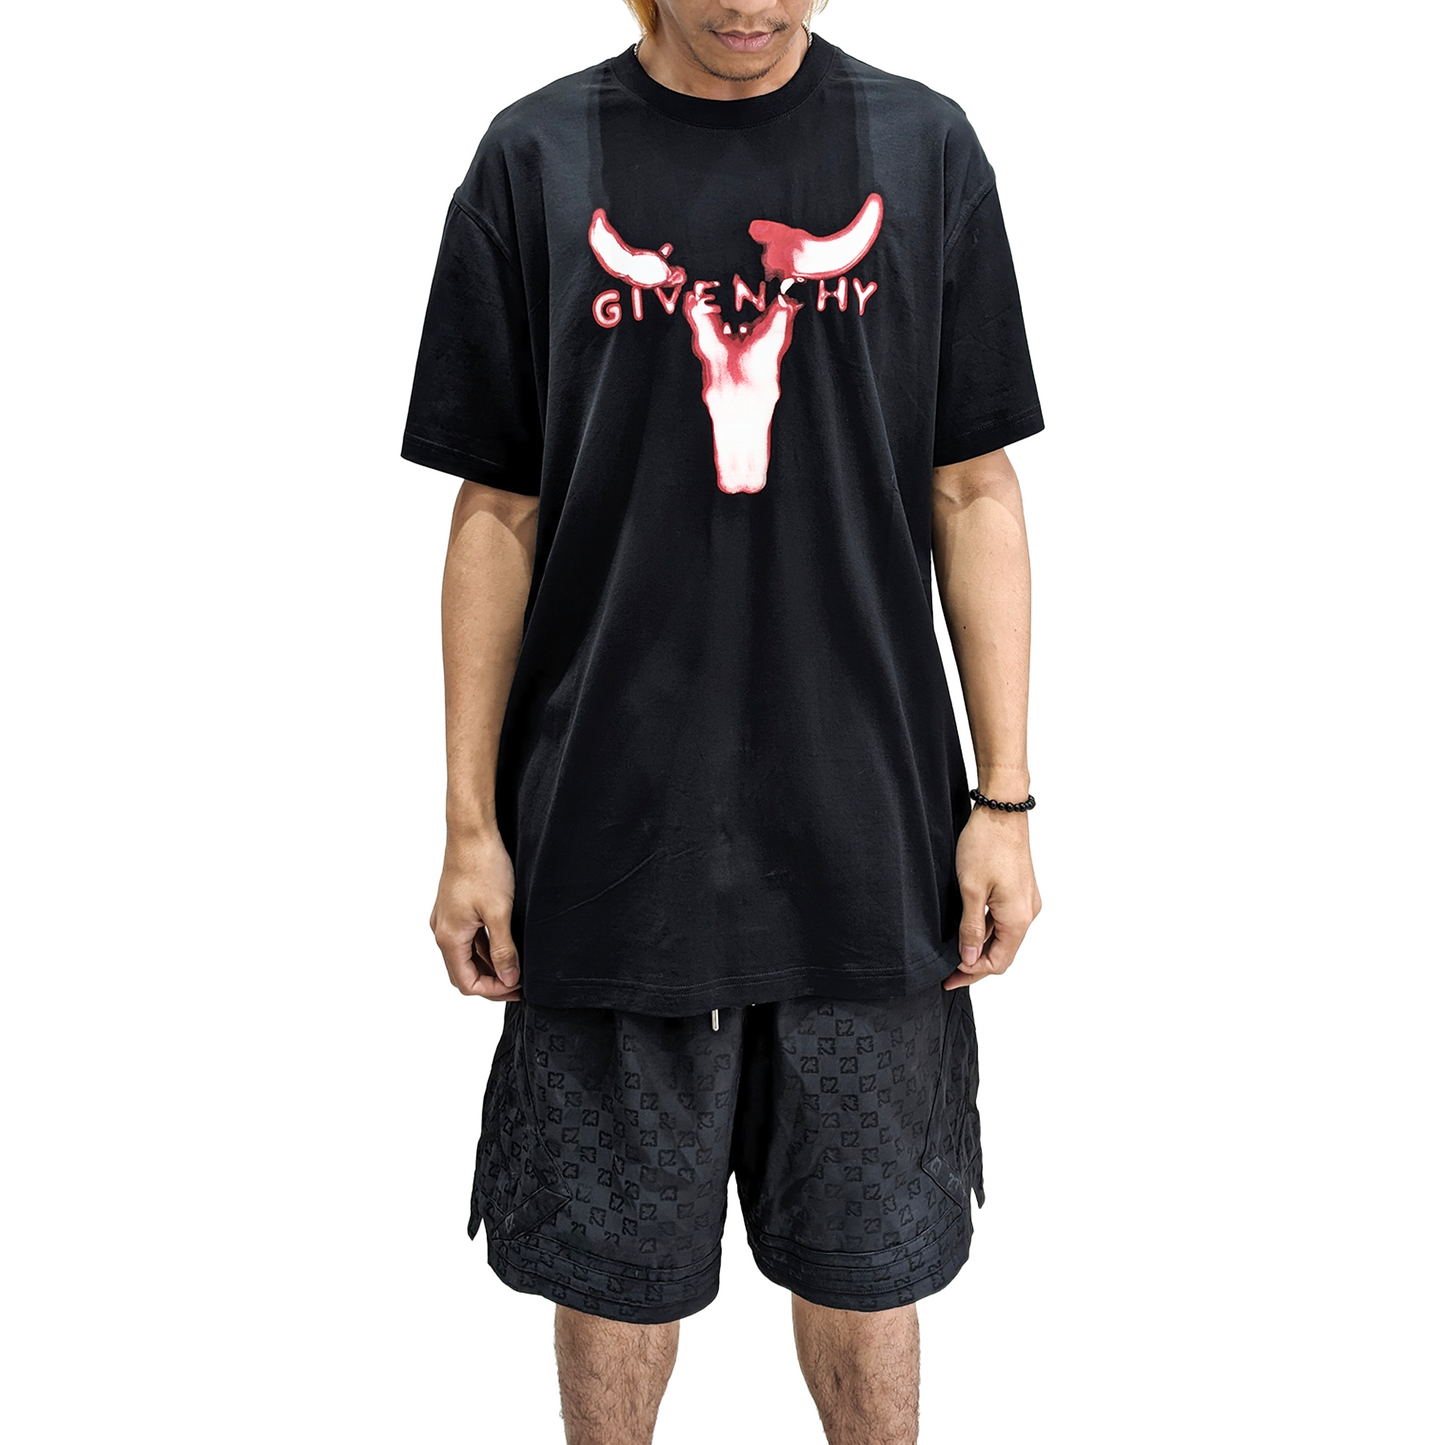 Givenchy Bull Tee Black (Oversize Fit)